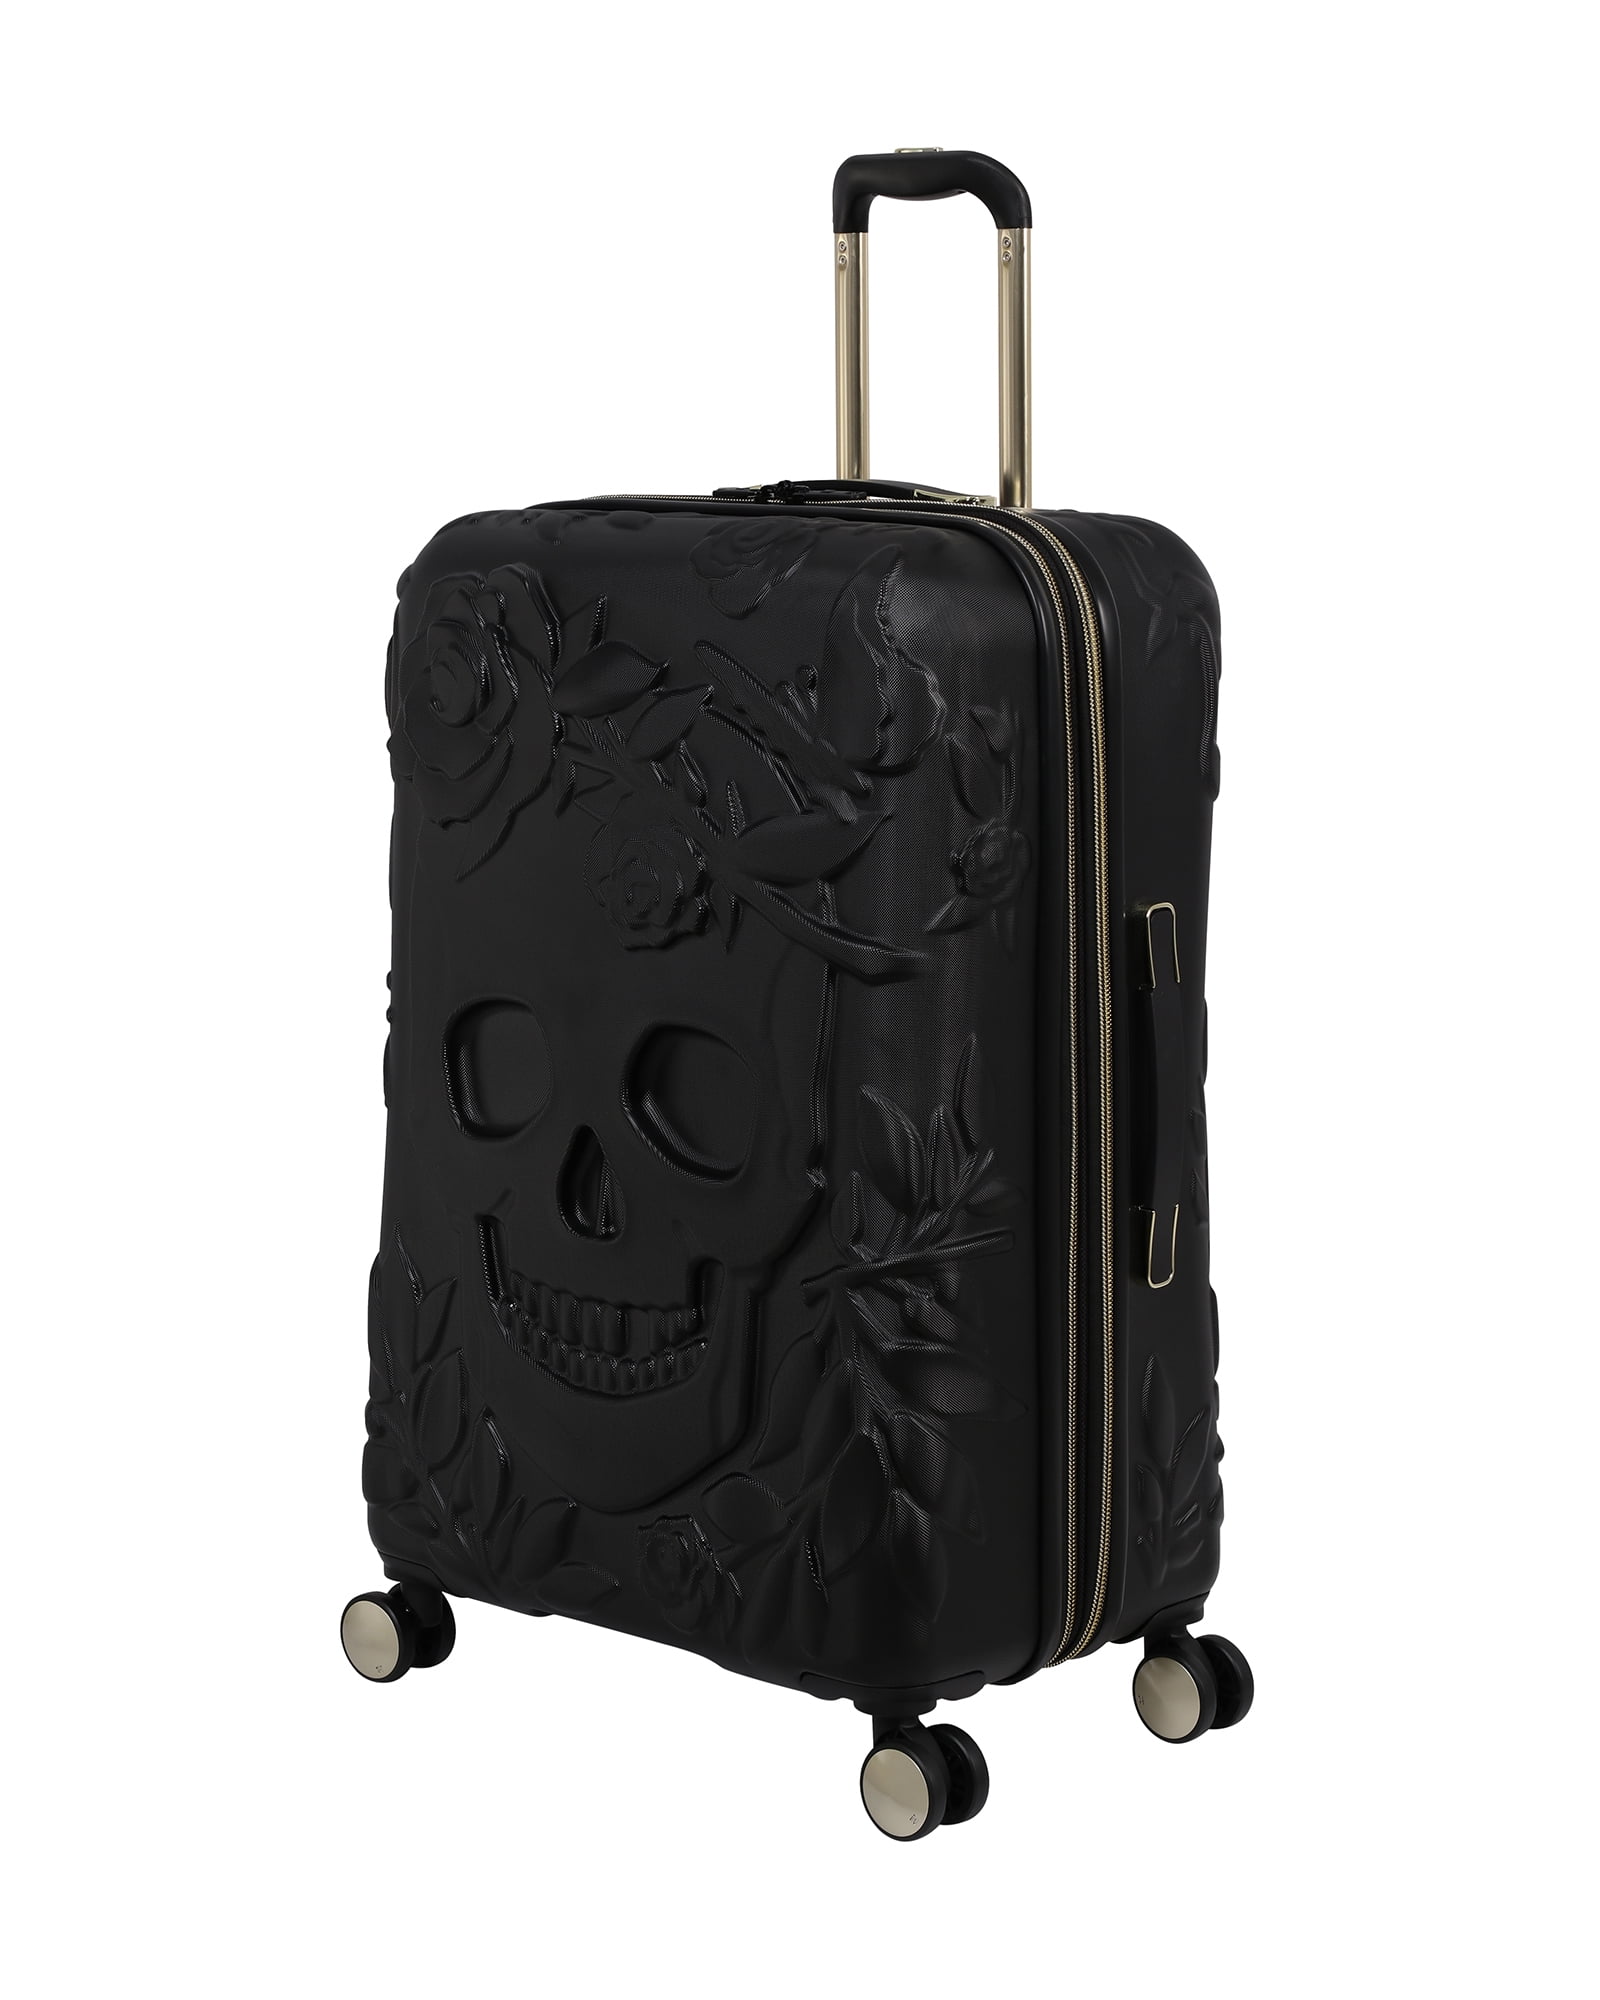 Red Fashion Rose Skull Traveler Lightweight Rotating Luggage Protector Case Can Carry With You Can Expand Travel Bag Trolley Rolling Luggage Protector Case